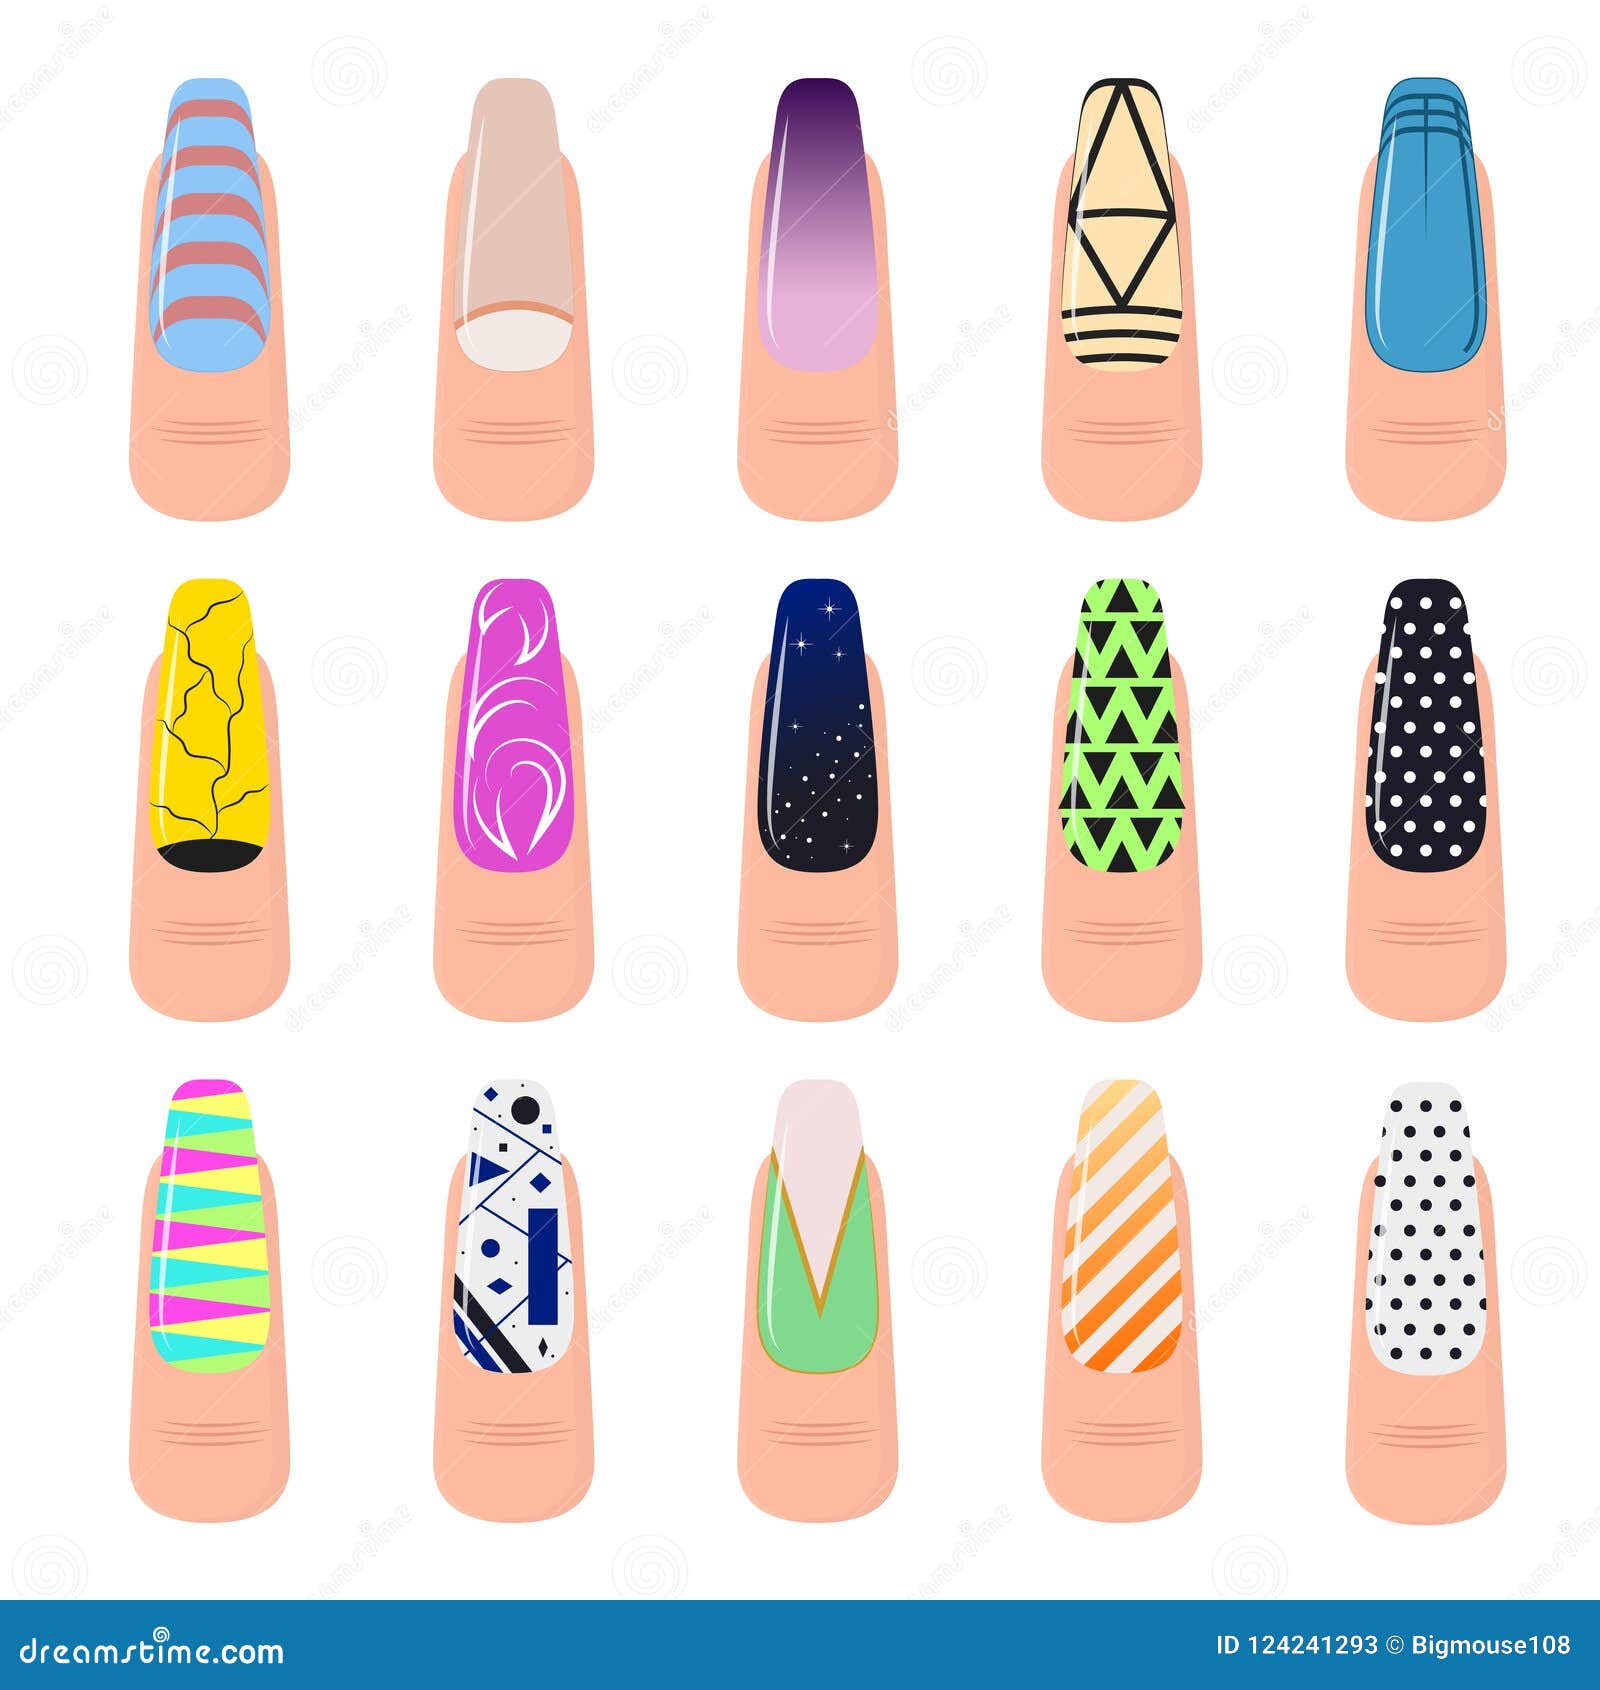 Manicure Types - Fulham Salon. Visit our site to request an appointment.